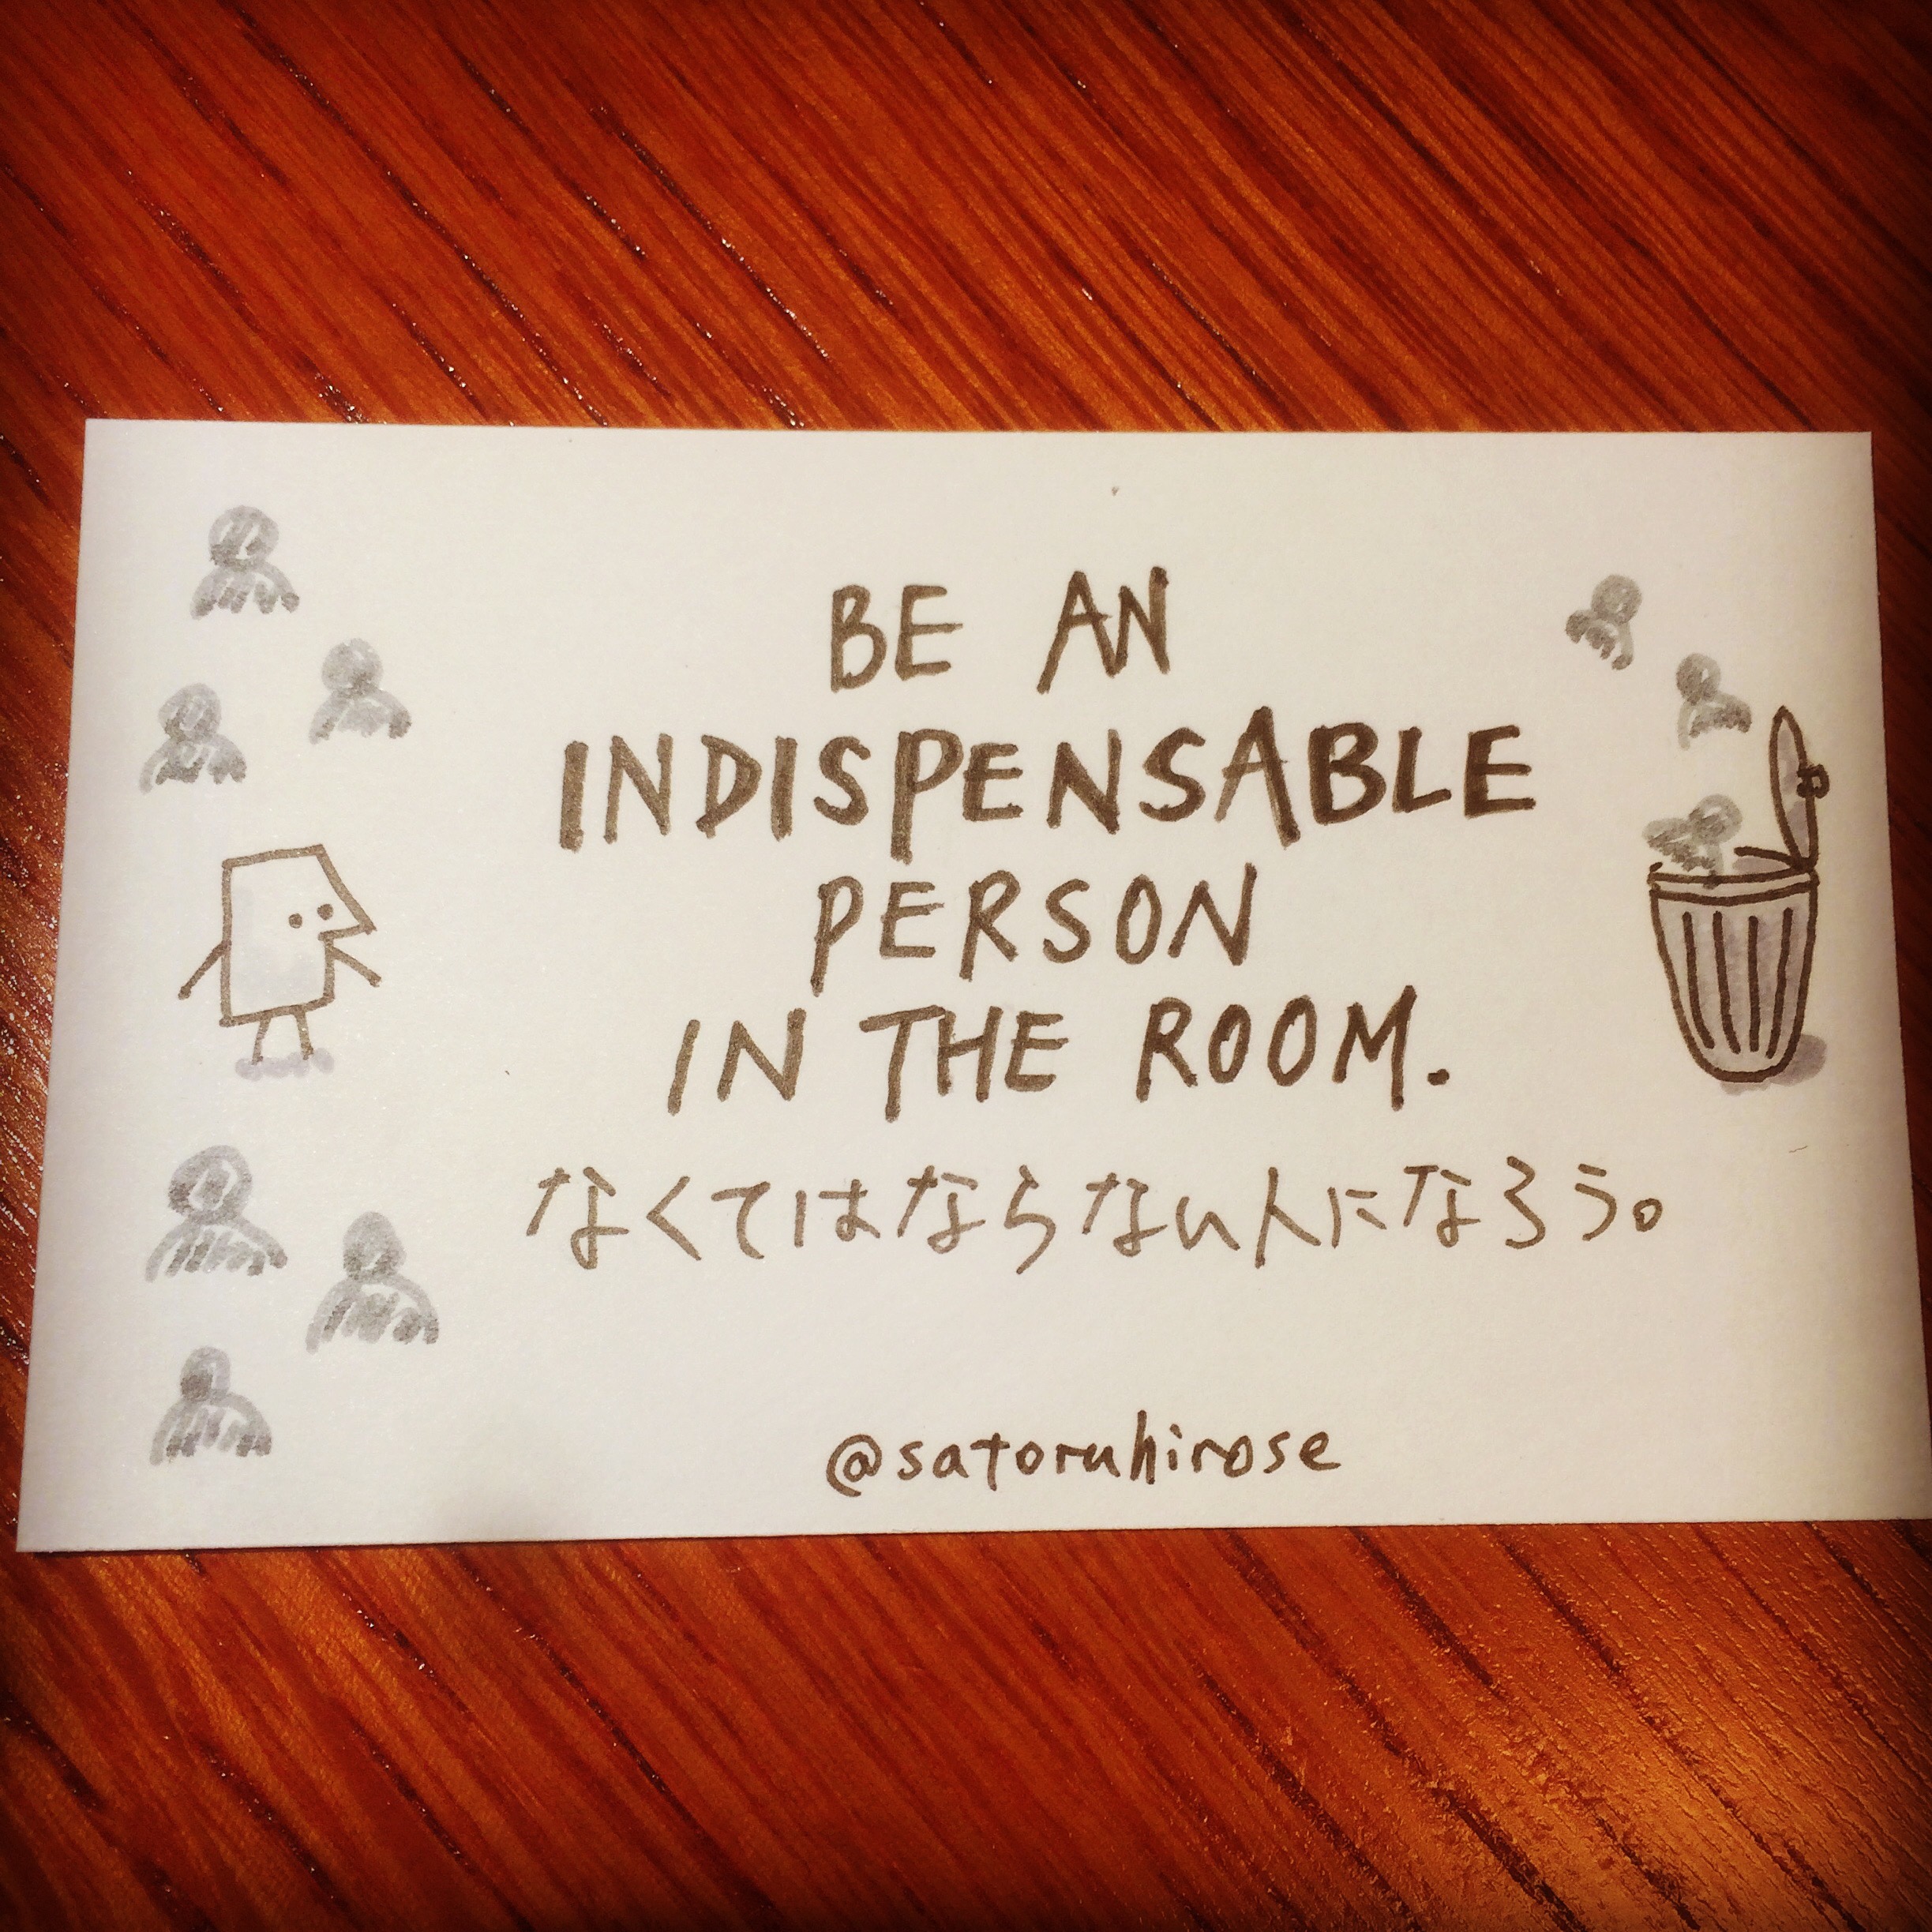 Be an indispensable person in the room.